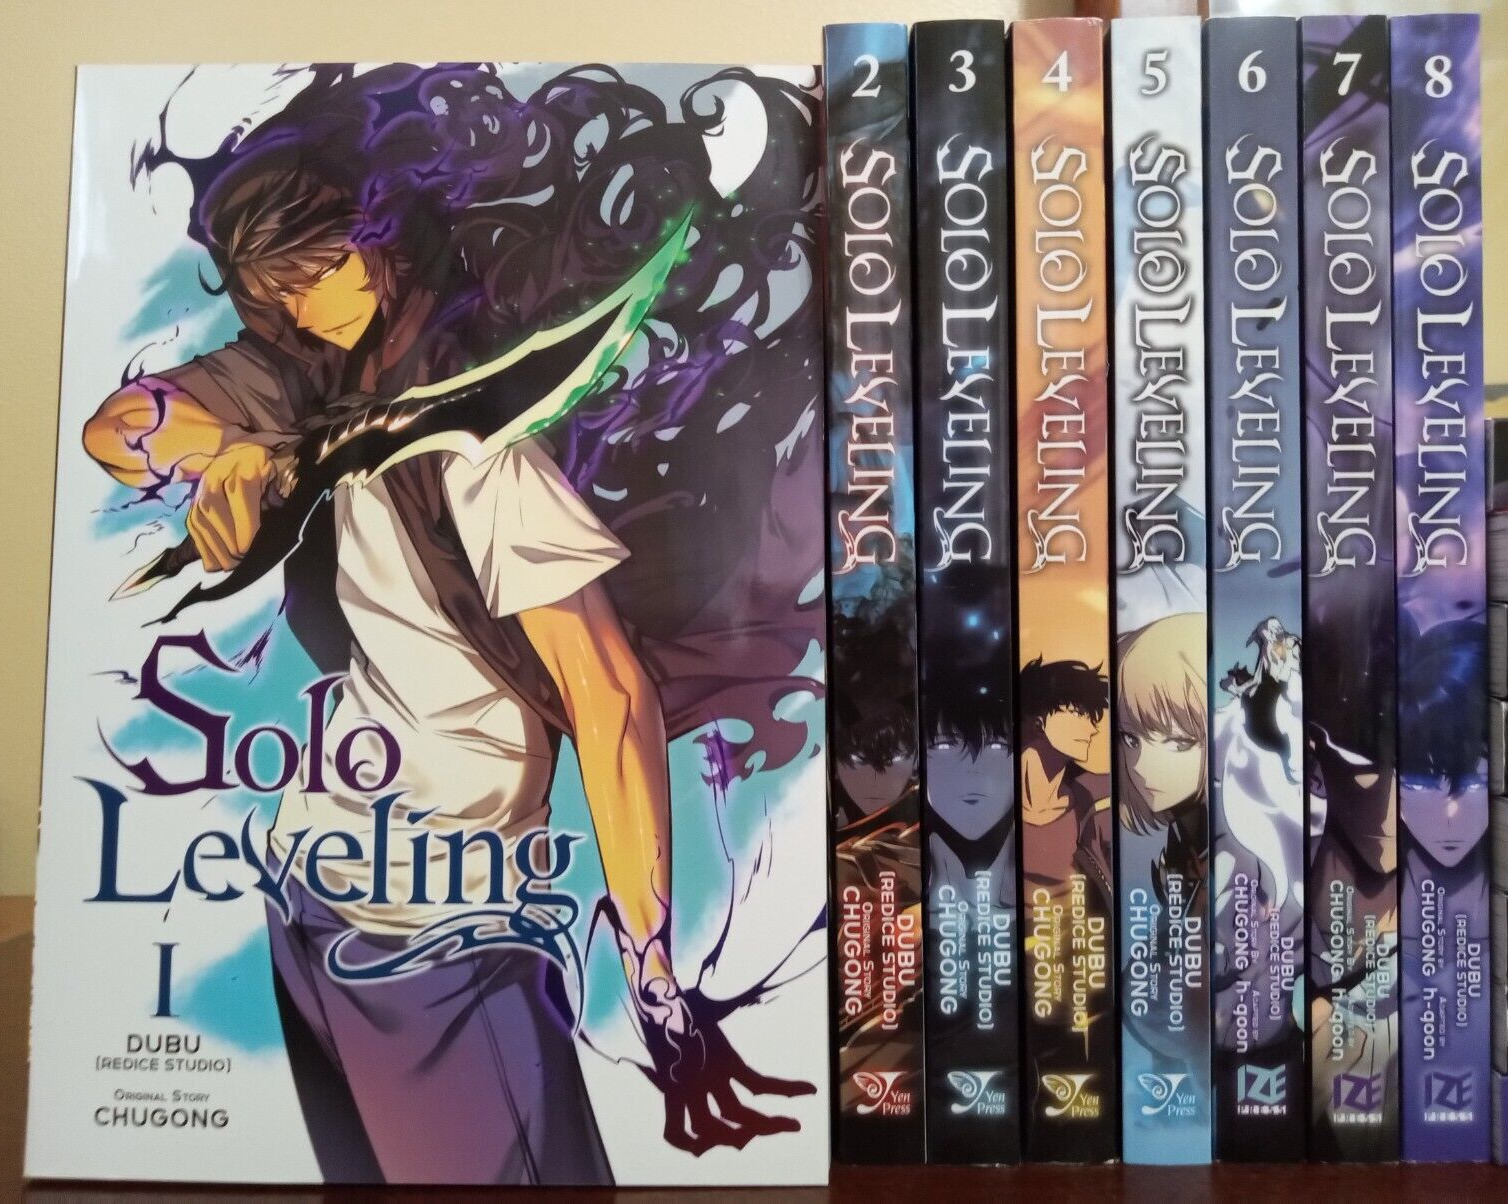 Solo Leveling Manhwa Vol. 1-8 Complete Set Comic Full Color English Chugong